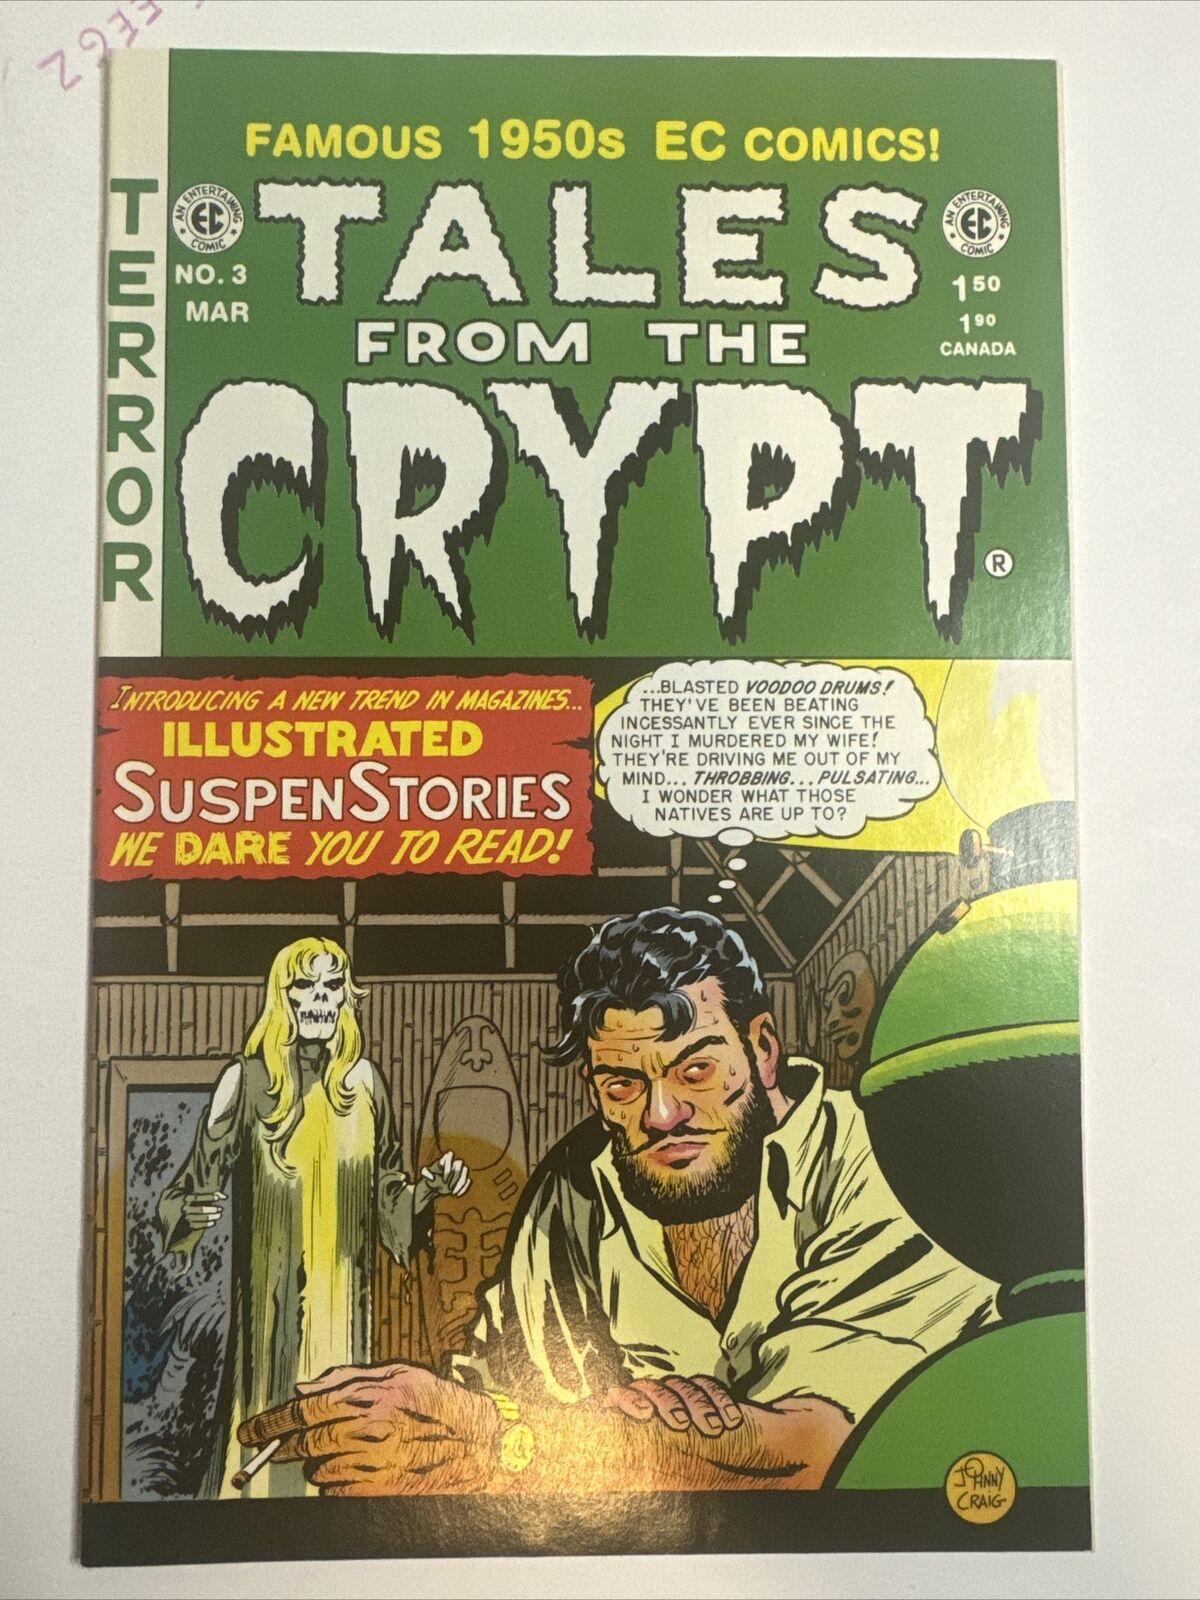 Tales from the Crypt #3: “The Crypt Of Terror” Cochrane EC Comics 1993 NM